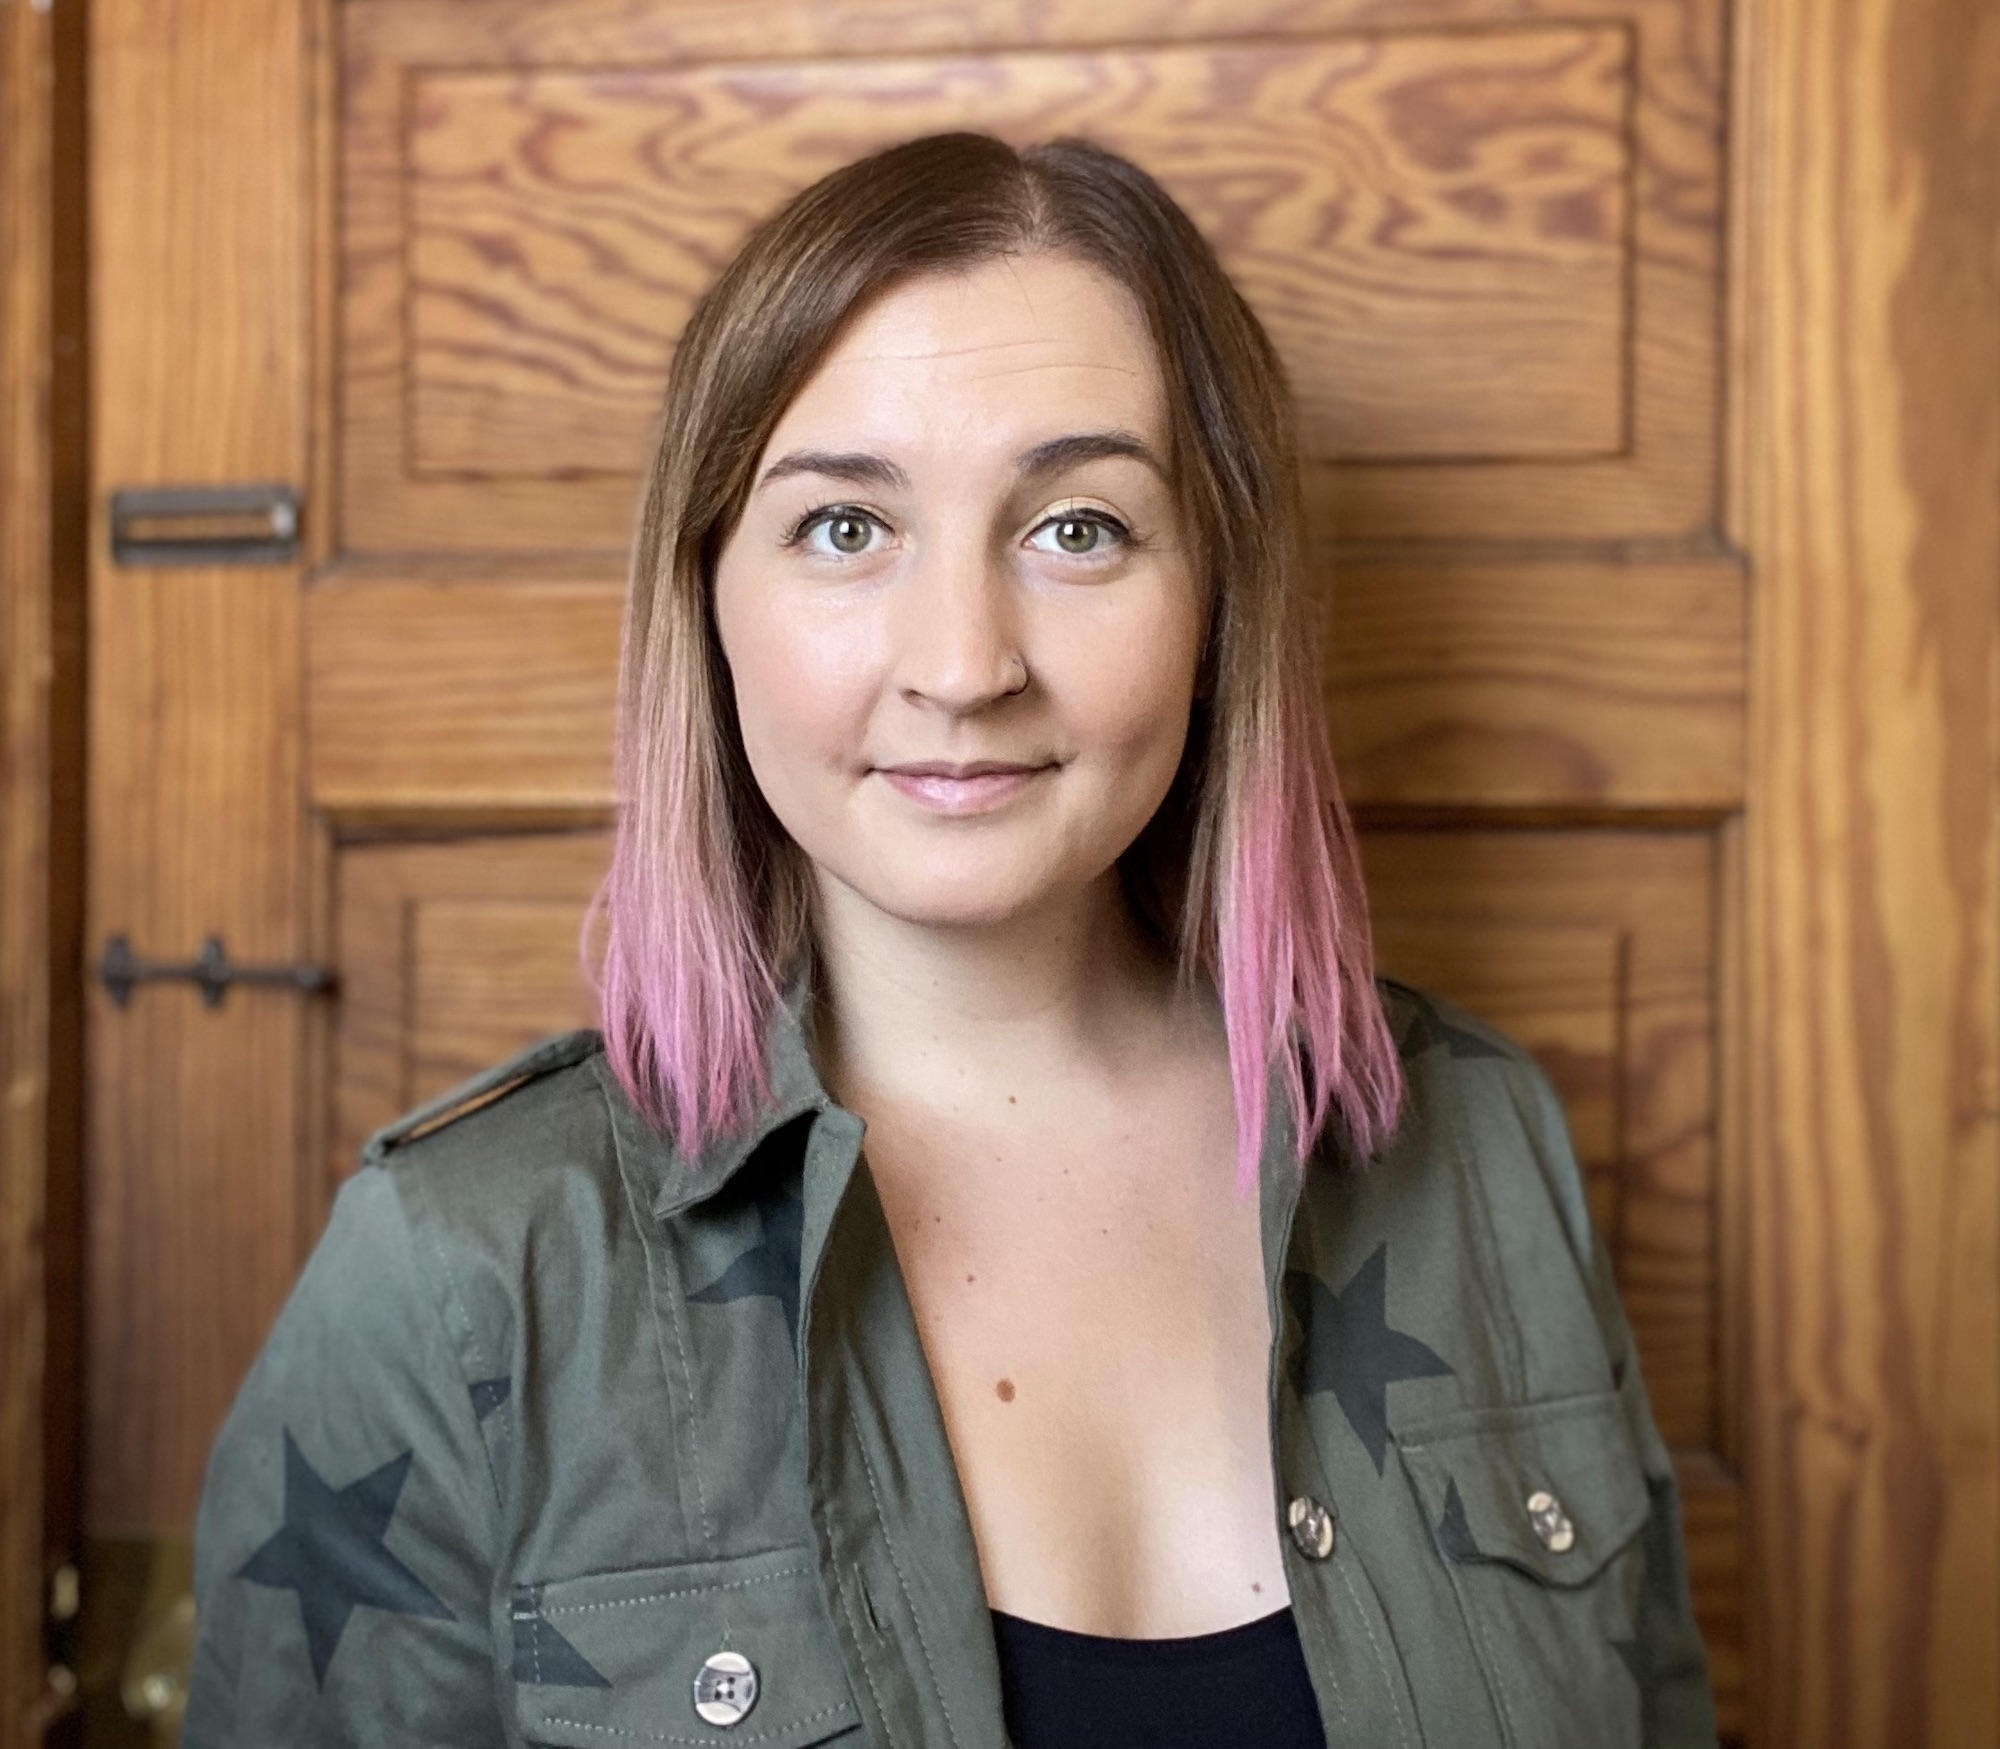 Headshot of Katie Kiesewetter. She is standing in front of of a wooden door with pink hair and an army green jacket with stars on it.